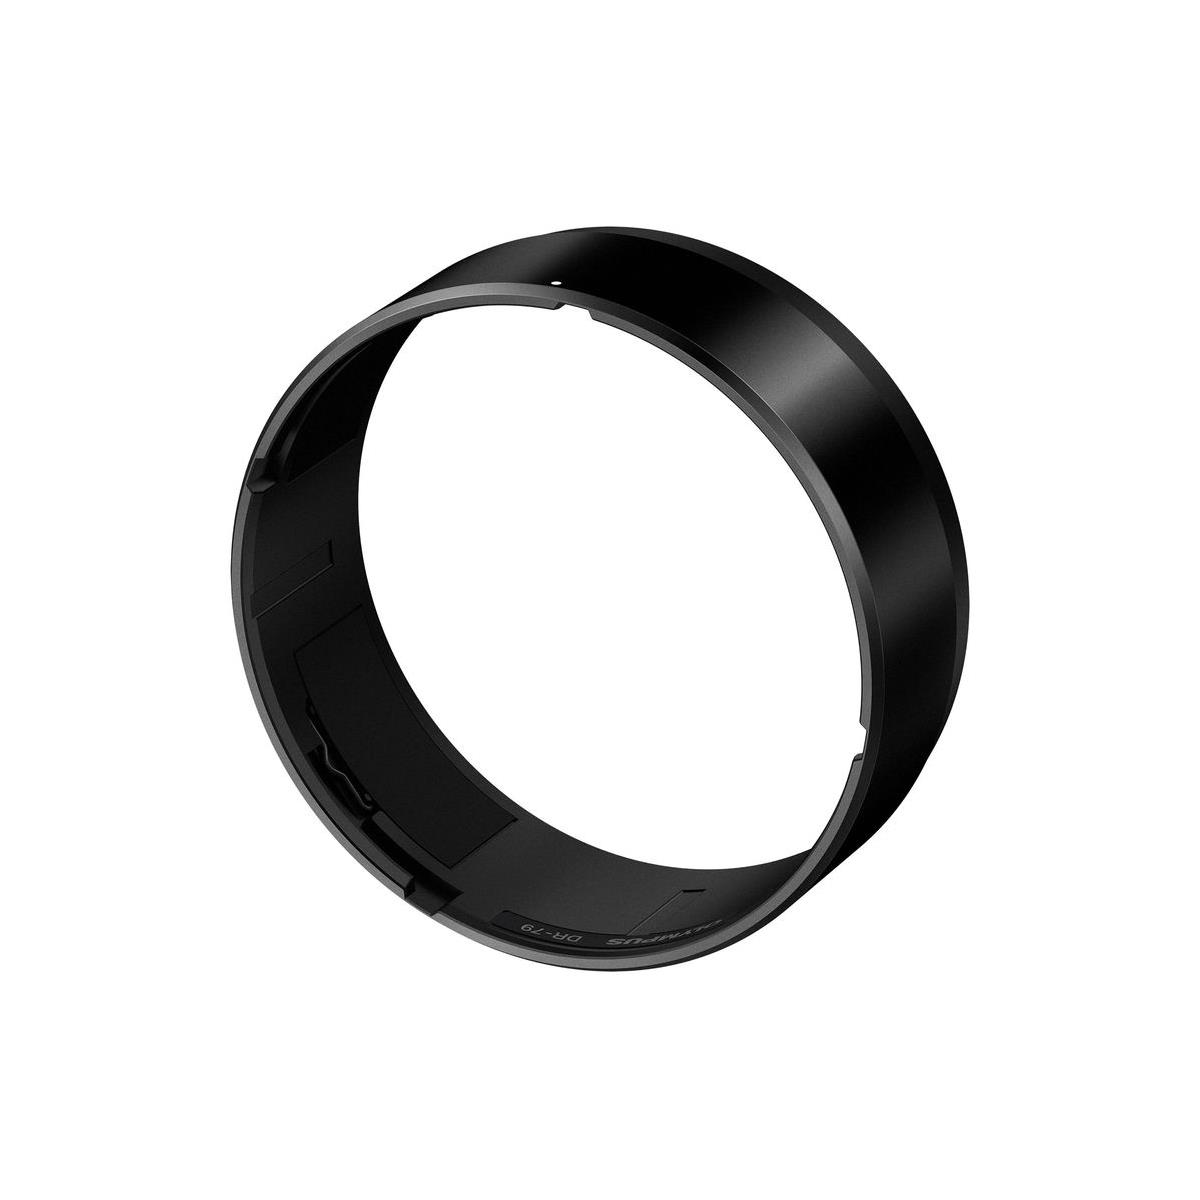 Image of Olympus Replacement Decoration Ring for the M. Zuiko ED 300mm f4.0 PRO Lens